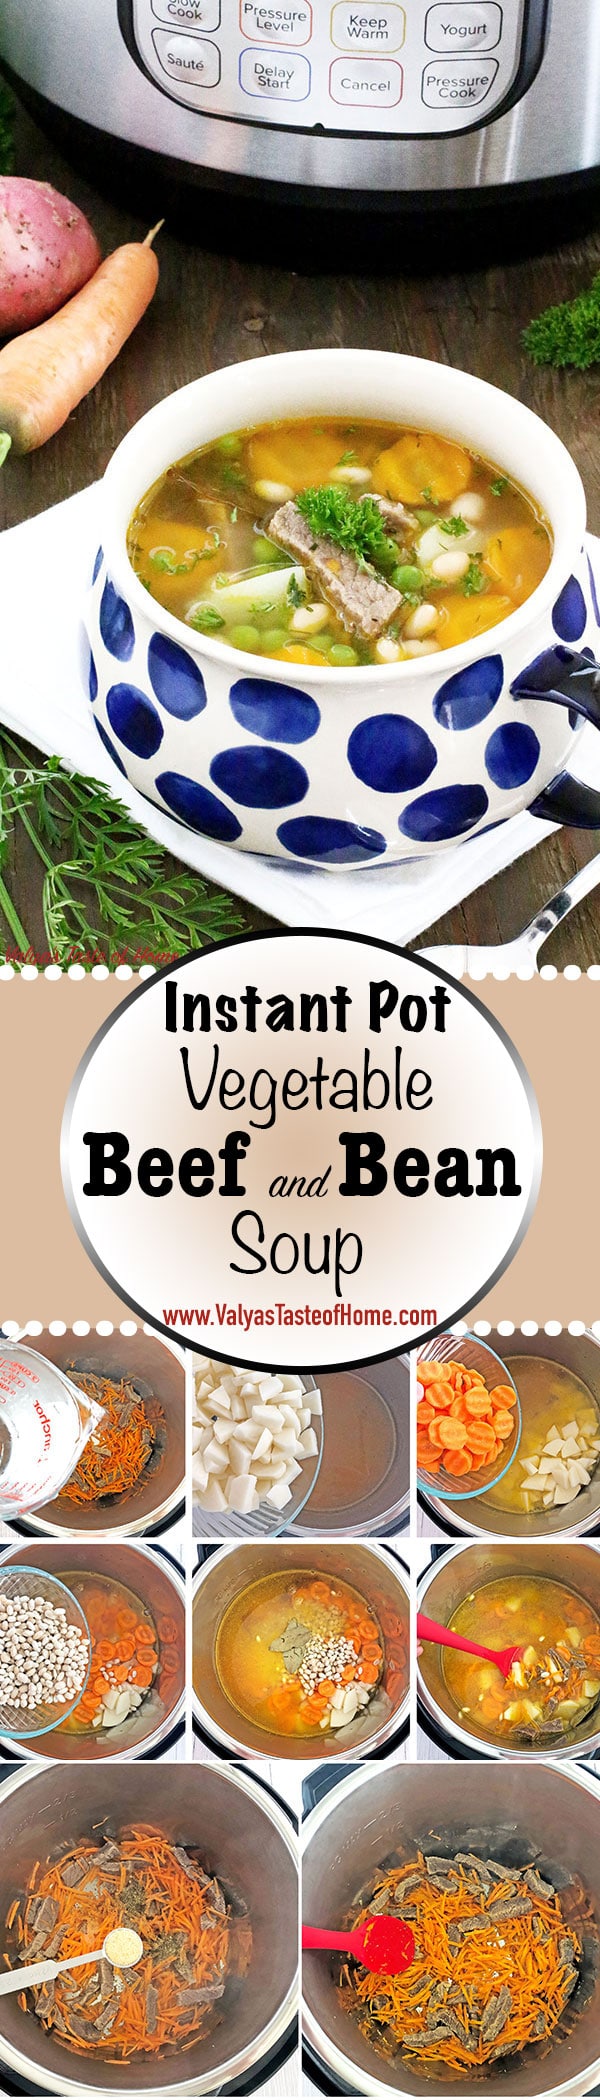 What can be better than savoury bowl of warm soup during the fall season, especially made out of homegrown vegetables? This super tasty Instant Pot Vegetable Beef and Bean Soup Recipe has an amazingly nutritious blend of ingredients, comes together very quick and easy.  #comfortfood #familydinner #familyfavorite #heartymeal #homemade #instantpotsoup #kidsloveit #perfectlunch #quickandeasysouprecipe  #vegetablles